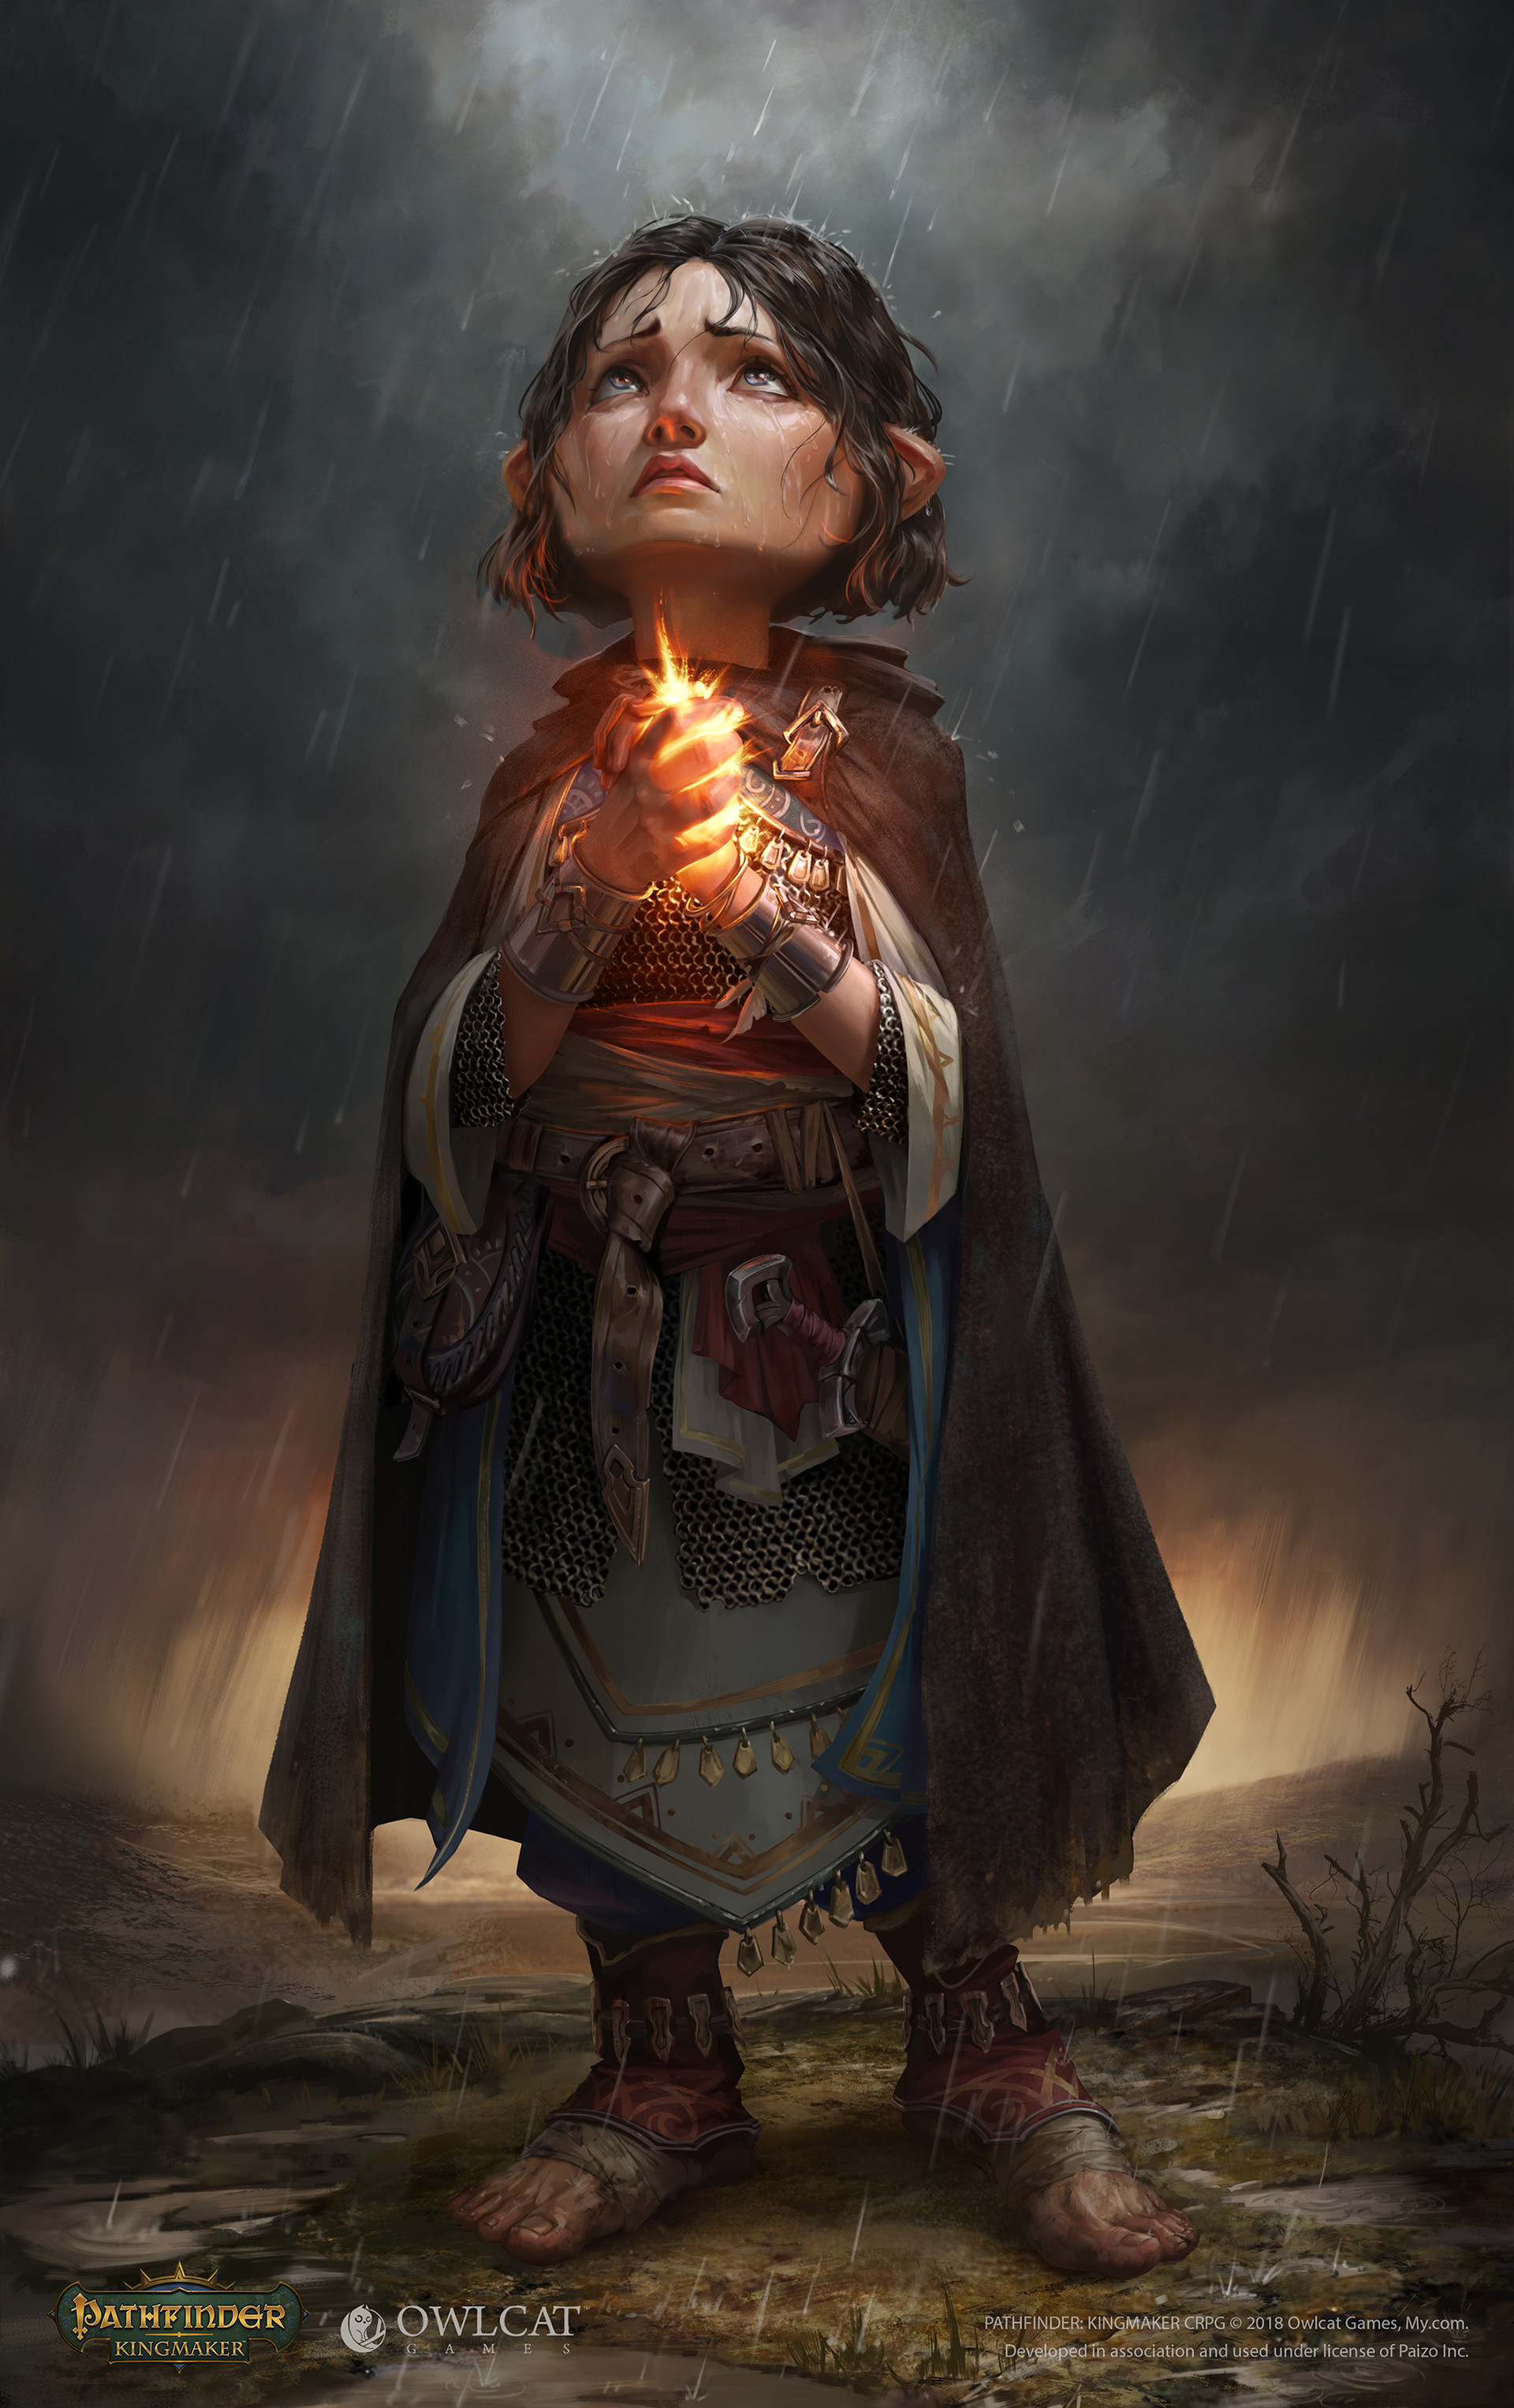 a halfling in chainmail holds a glowing object and looks plaintively up into a rainstorm